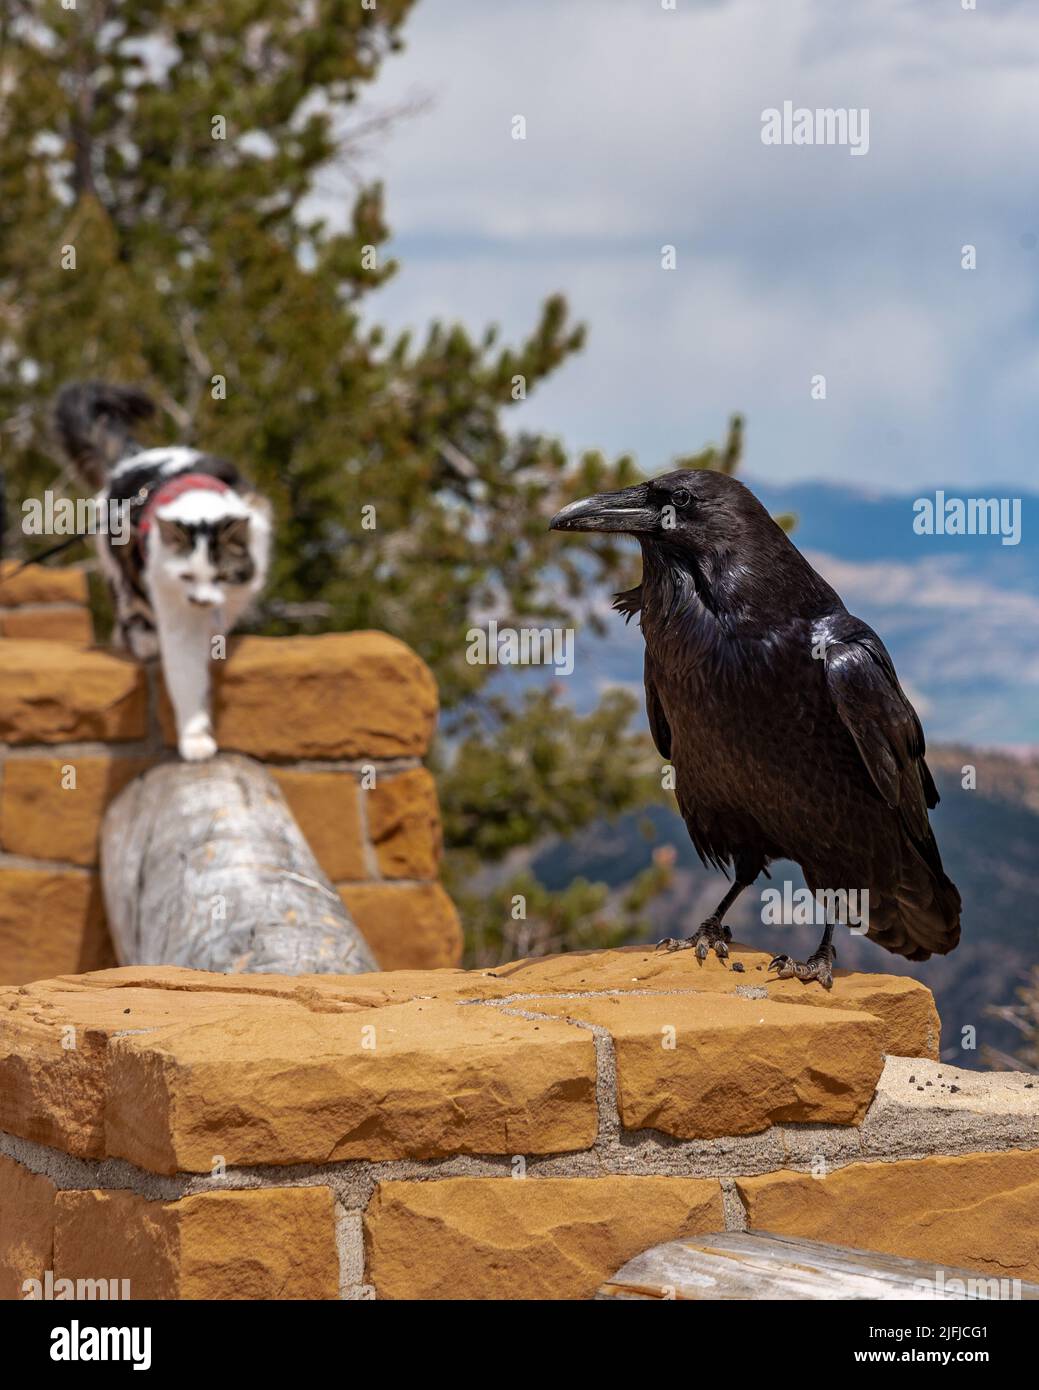 Pet cat walking towards a large raven in Bryce Canyon National Park, Utah. Travelling, curious, fearless cat. Stock Photo